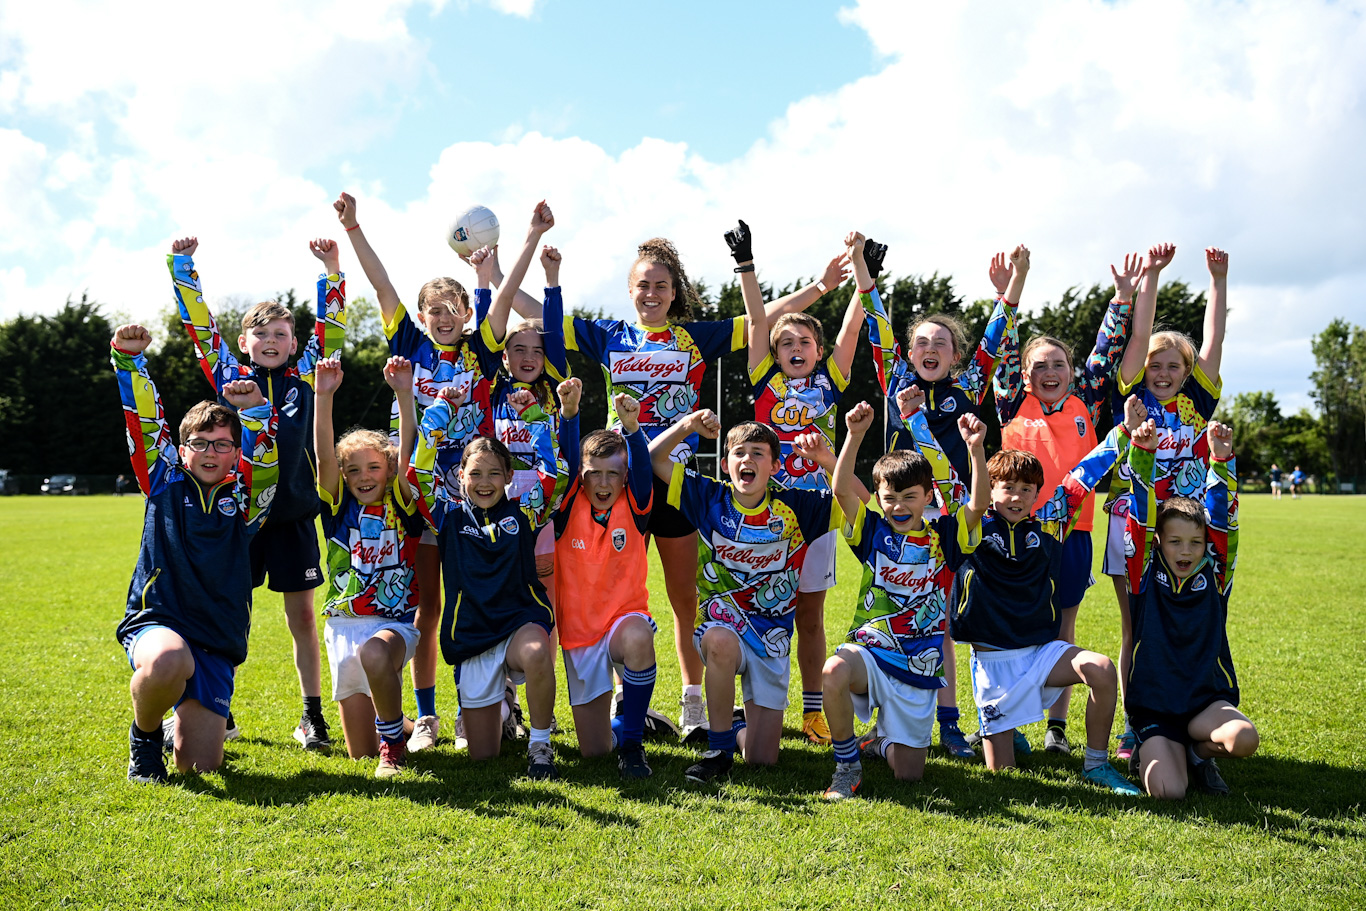 Calling all Monaghan GAA Clubs – €40,000 up for grabs for local GAA clubs through Kellogg’s GAA Cúl Camps on-pack competition